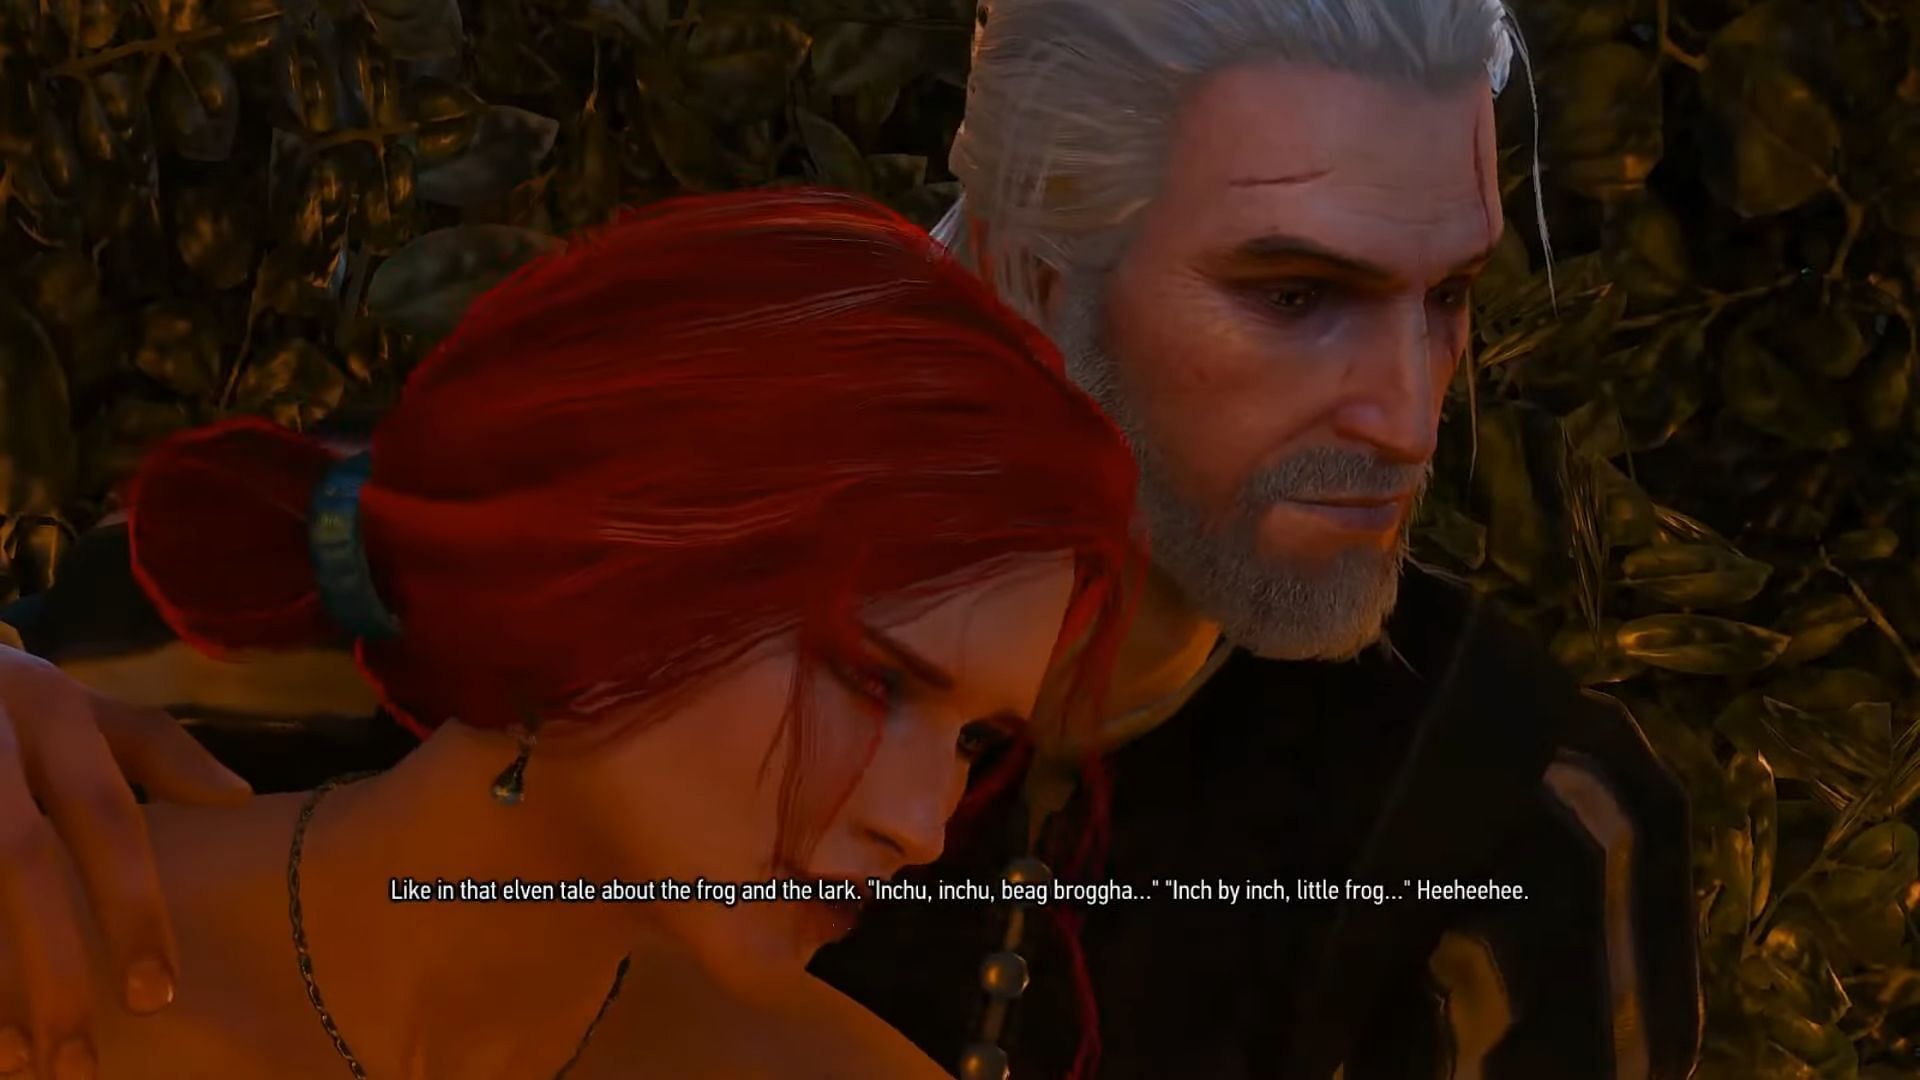 Do not romance Triss Merigold if you want Geralt to settle down with Yennefer in The Witcher 3 (Image via CDPR)